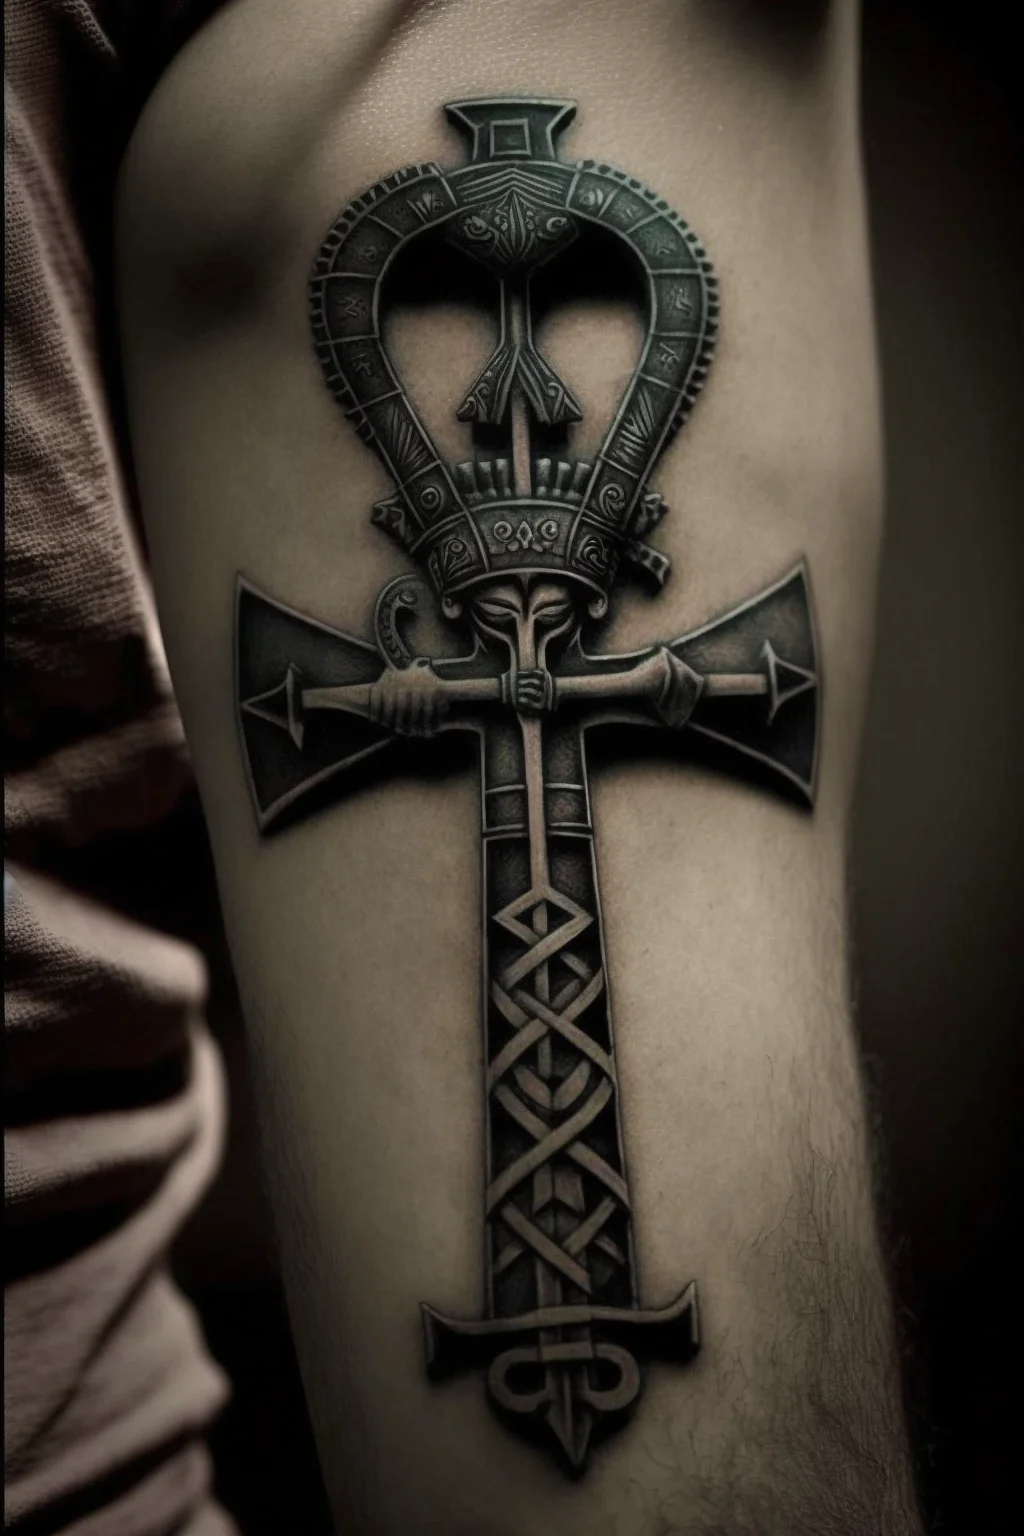 Top 10 Ankh Tattoos: A Symbol of Life, Death, and Rebirth 2023